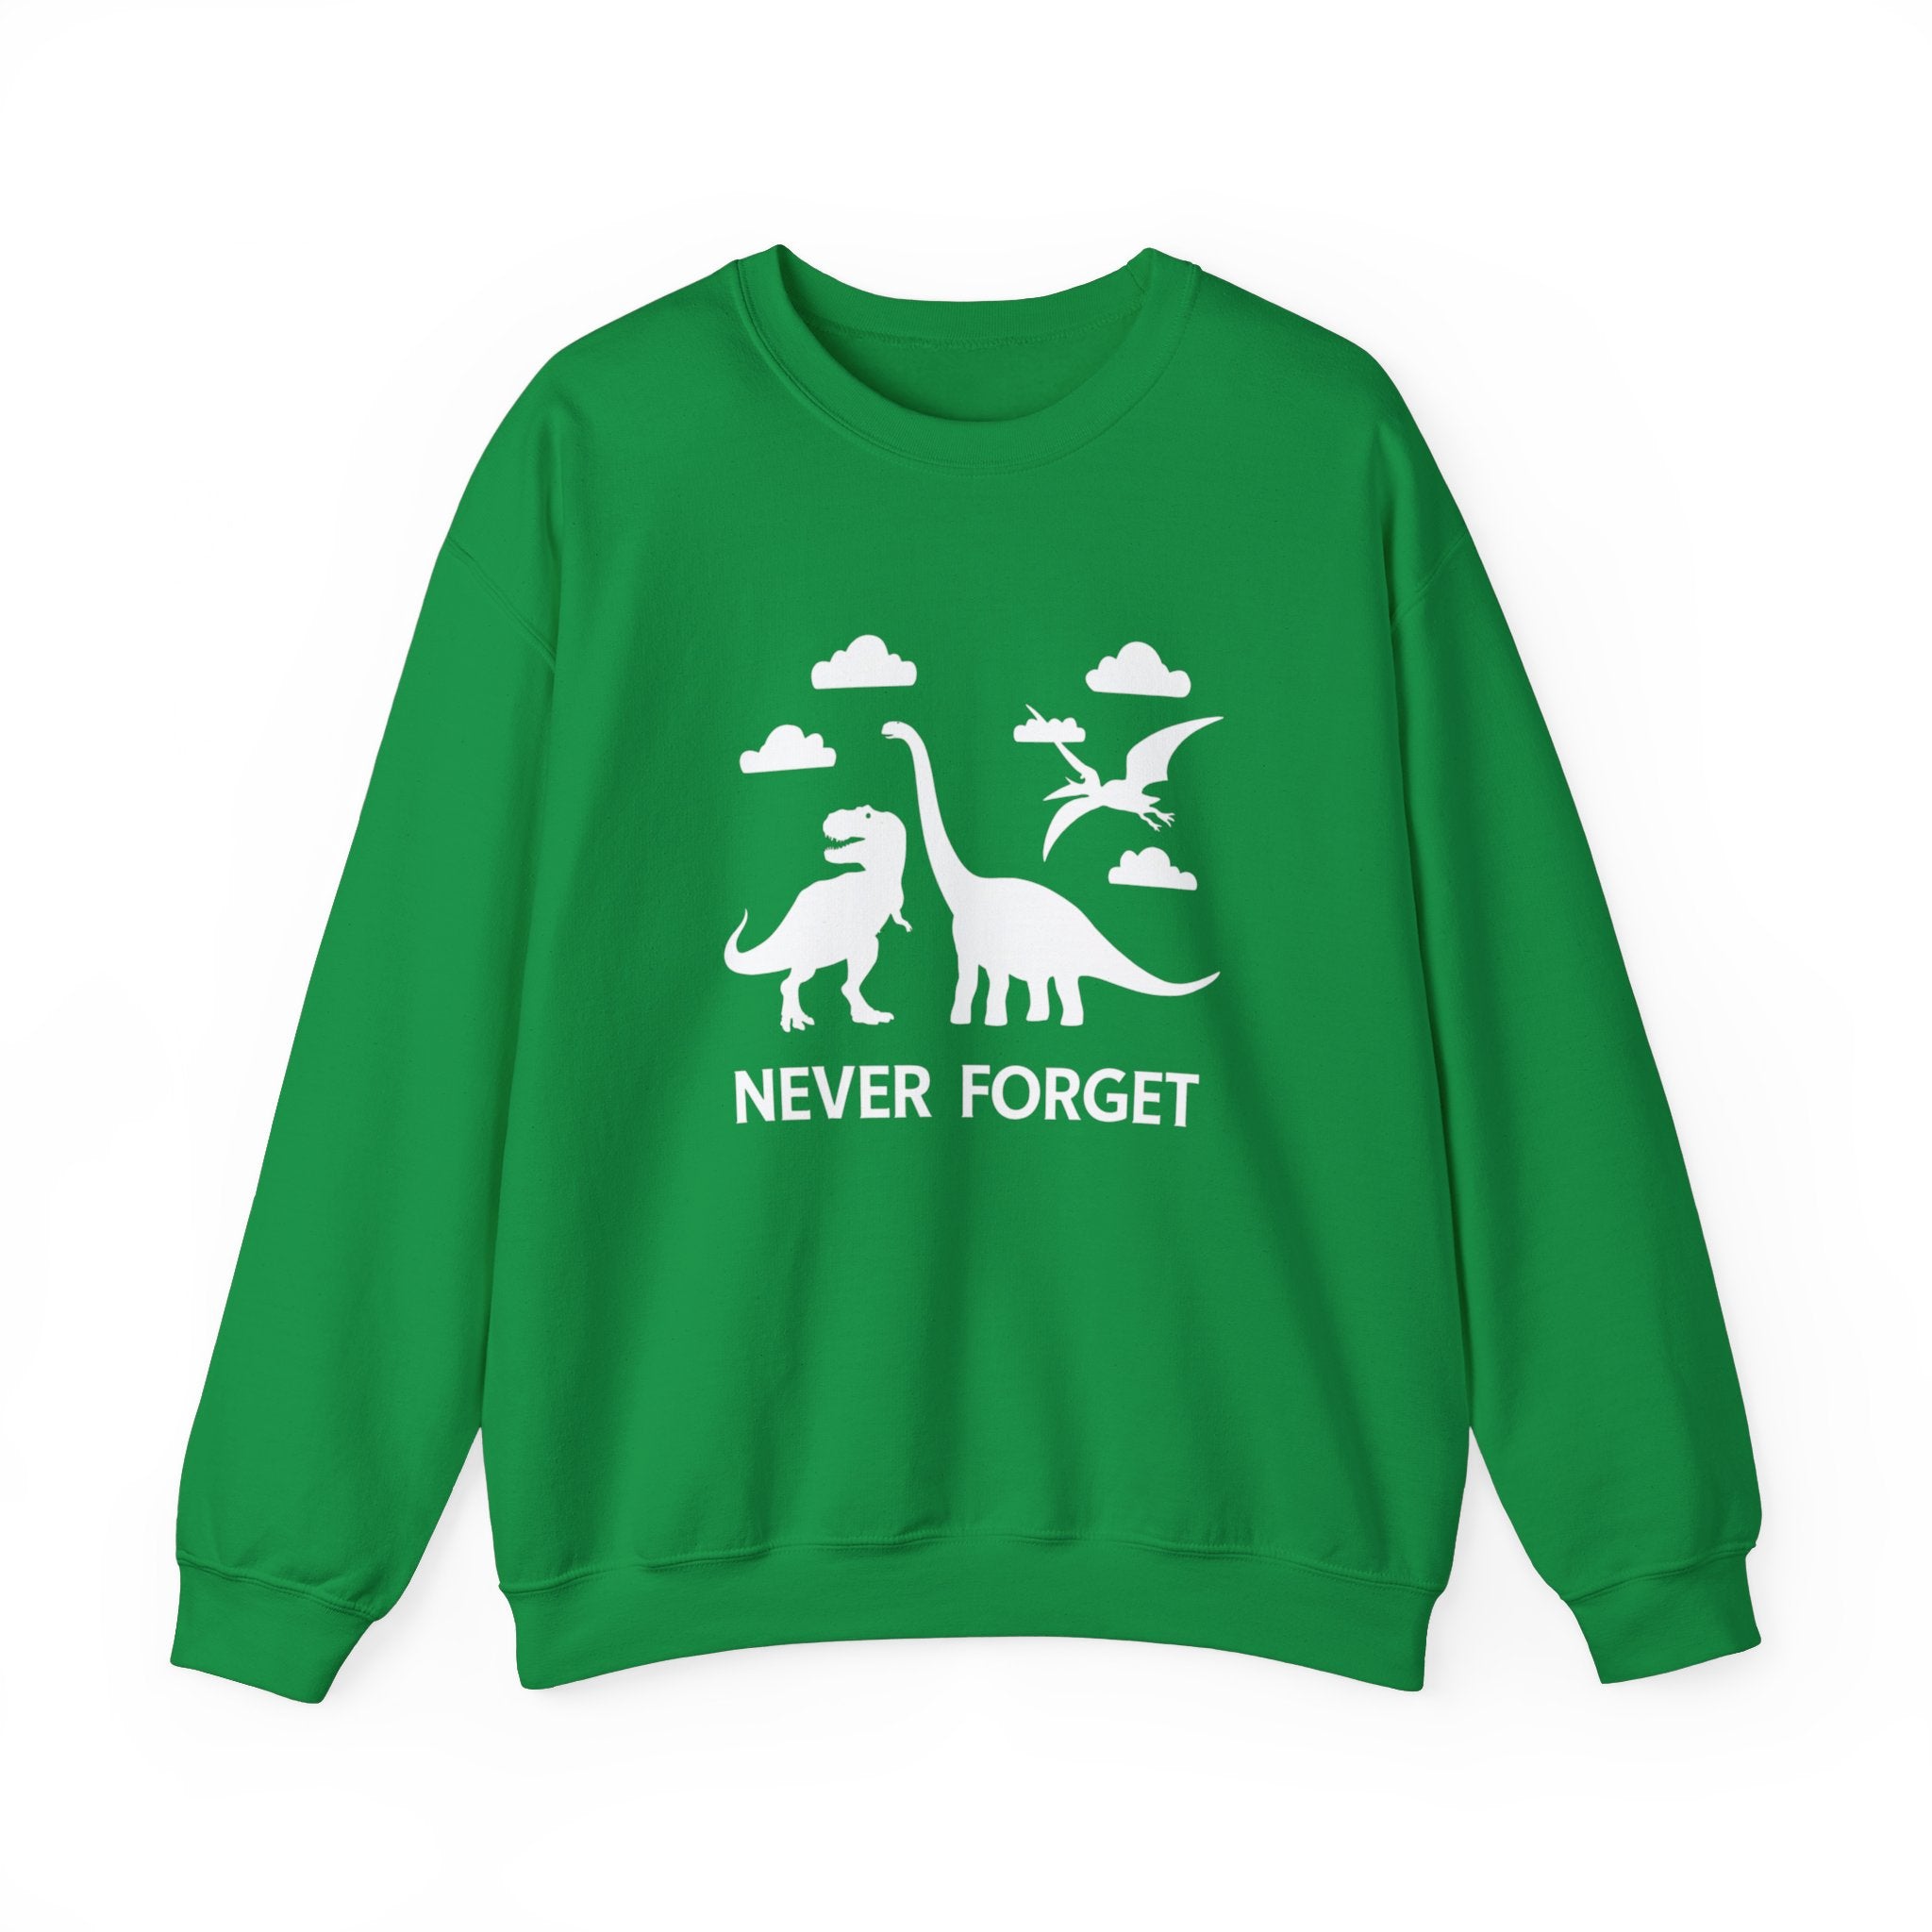 The cozy green Never Forget - Sweatshirt features white silhouettes of dinosaurs with the words "NEVER FORGET" beneath them, making it an essential addition to your winter wardrobe.